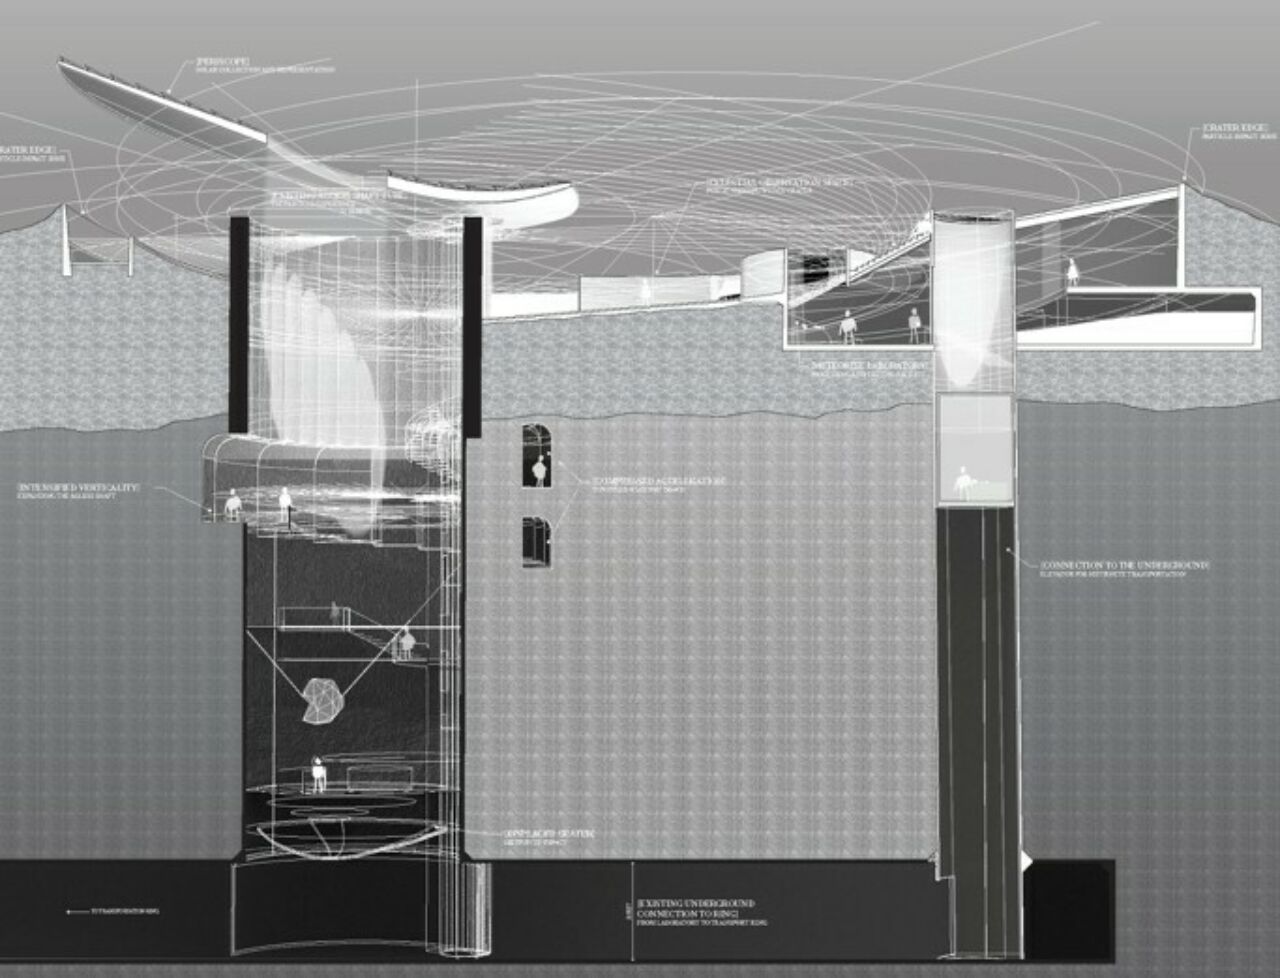 Complex grayscale architectural design section by MS in Architecture student.